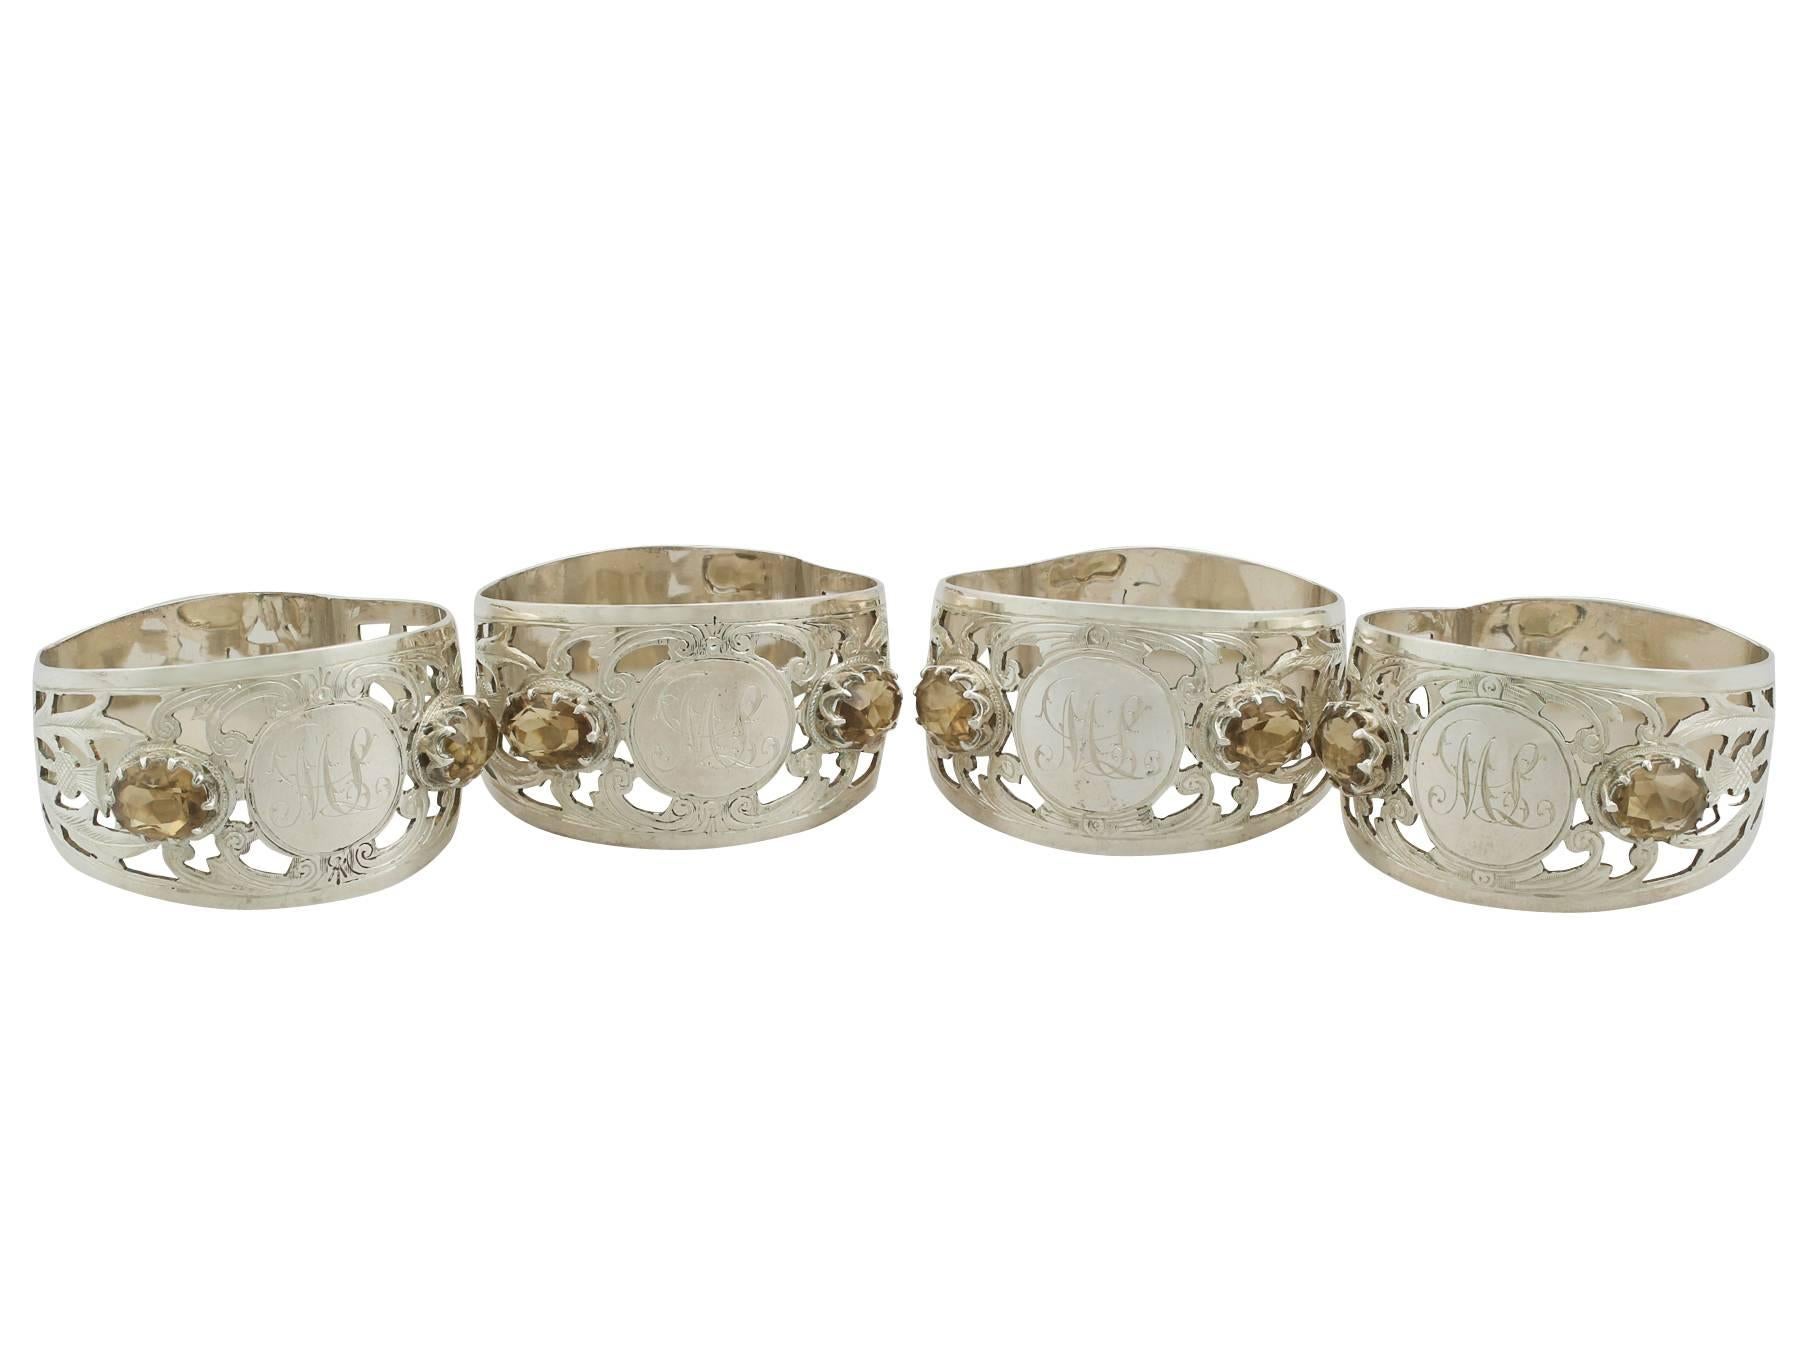 An exceptional, fine and impressive set of four antique George V English sterling silver and smoky topaz napkin rings - boxed; an addition to our dining silverware collection

This exceptional set of antique George V sterling silver napkin rings